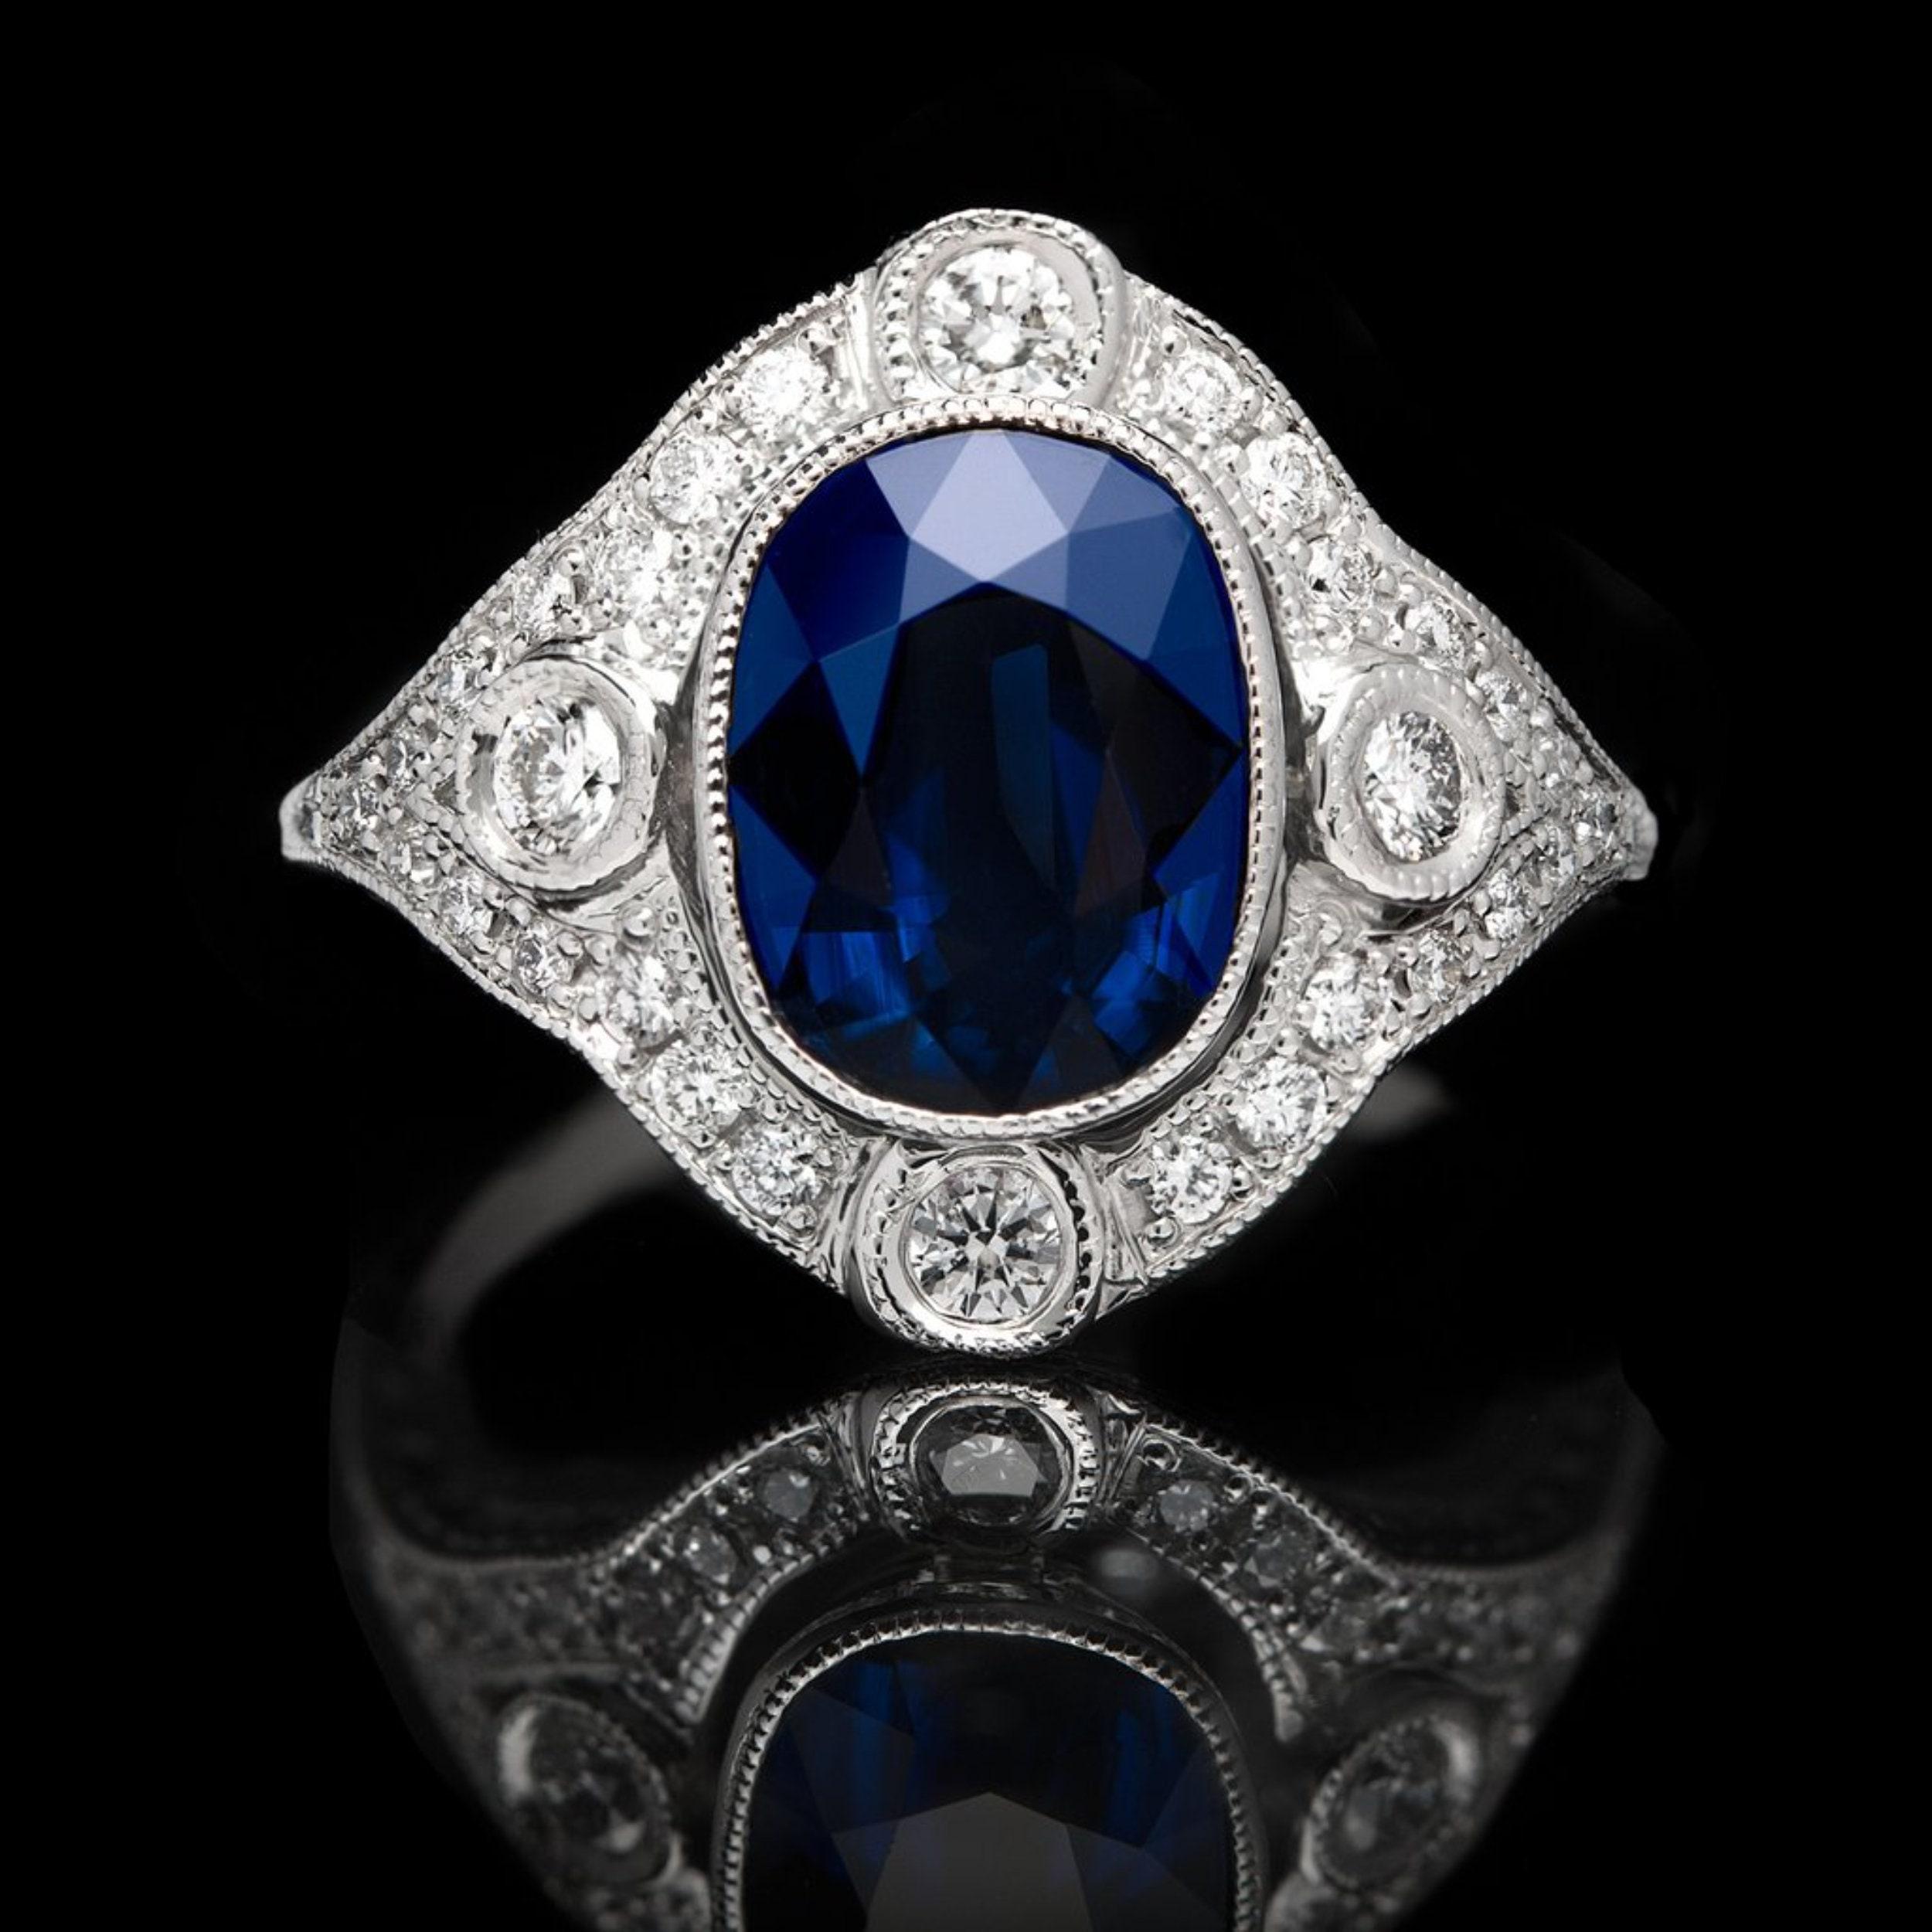 For Sale:  4 Carat Oval Cut Sapphire Diamond Engagement Ring, Blue Sapphire Wedding Ring 5